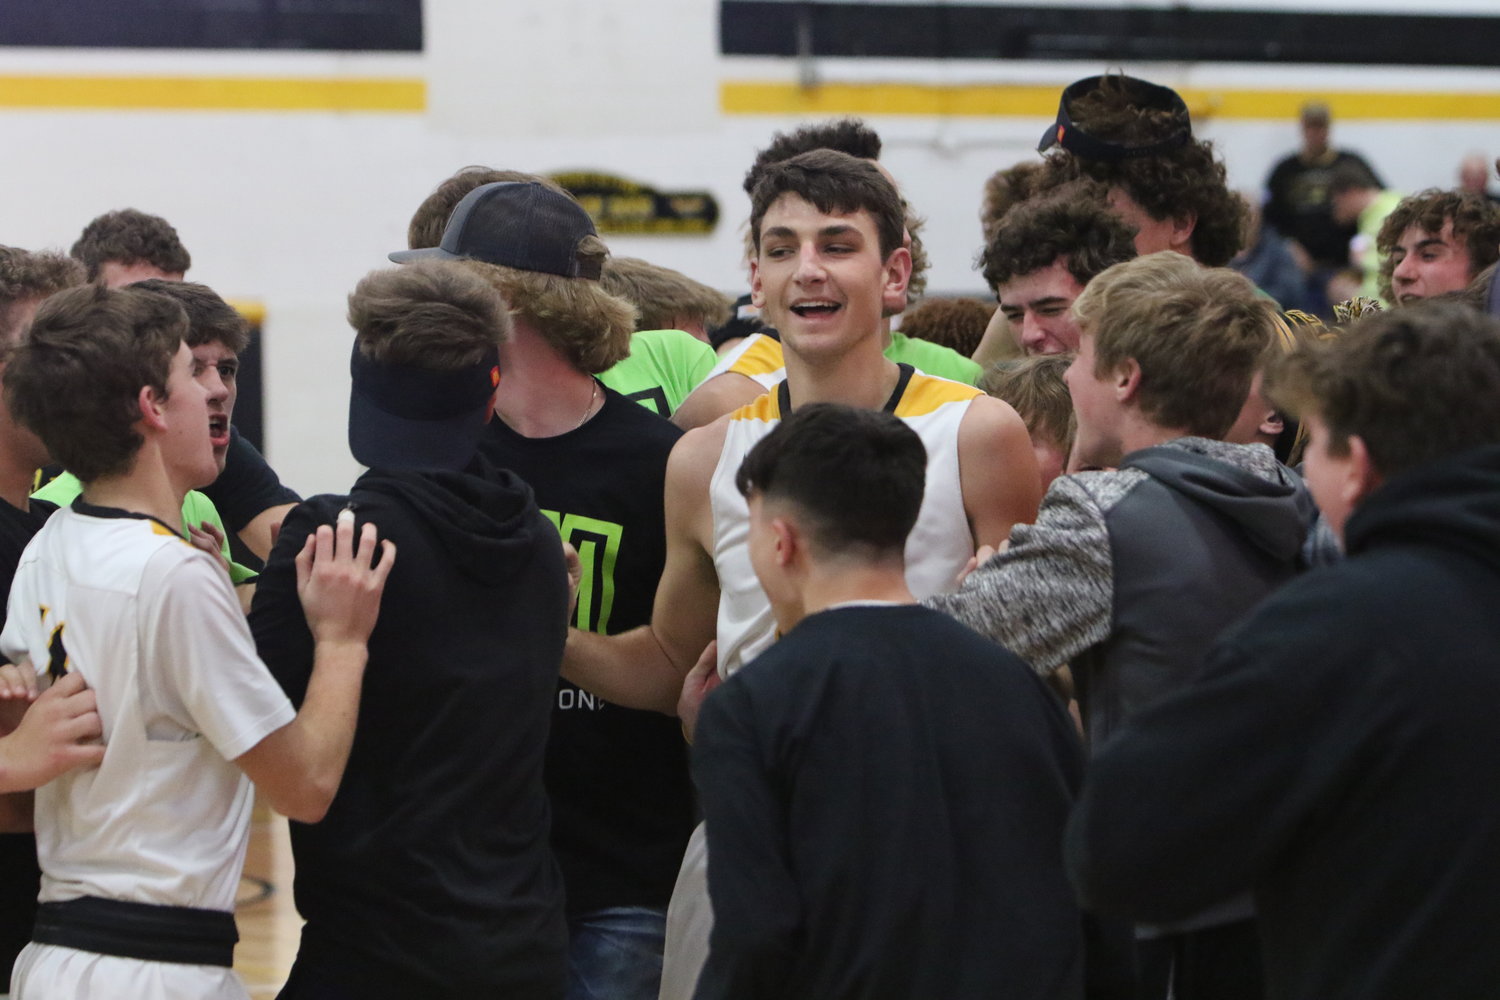 Golden Hawk students and fans surround Mid-Prairie senior center Ethan Kos after Monday's victory over Williamsburg.